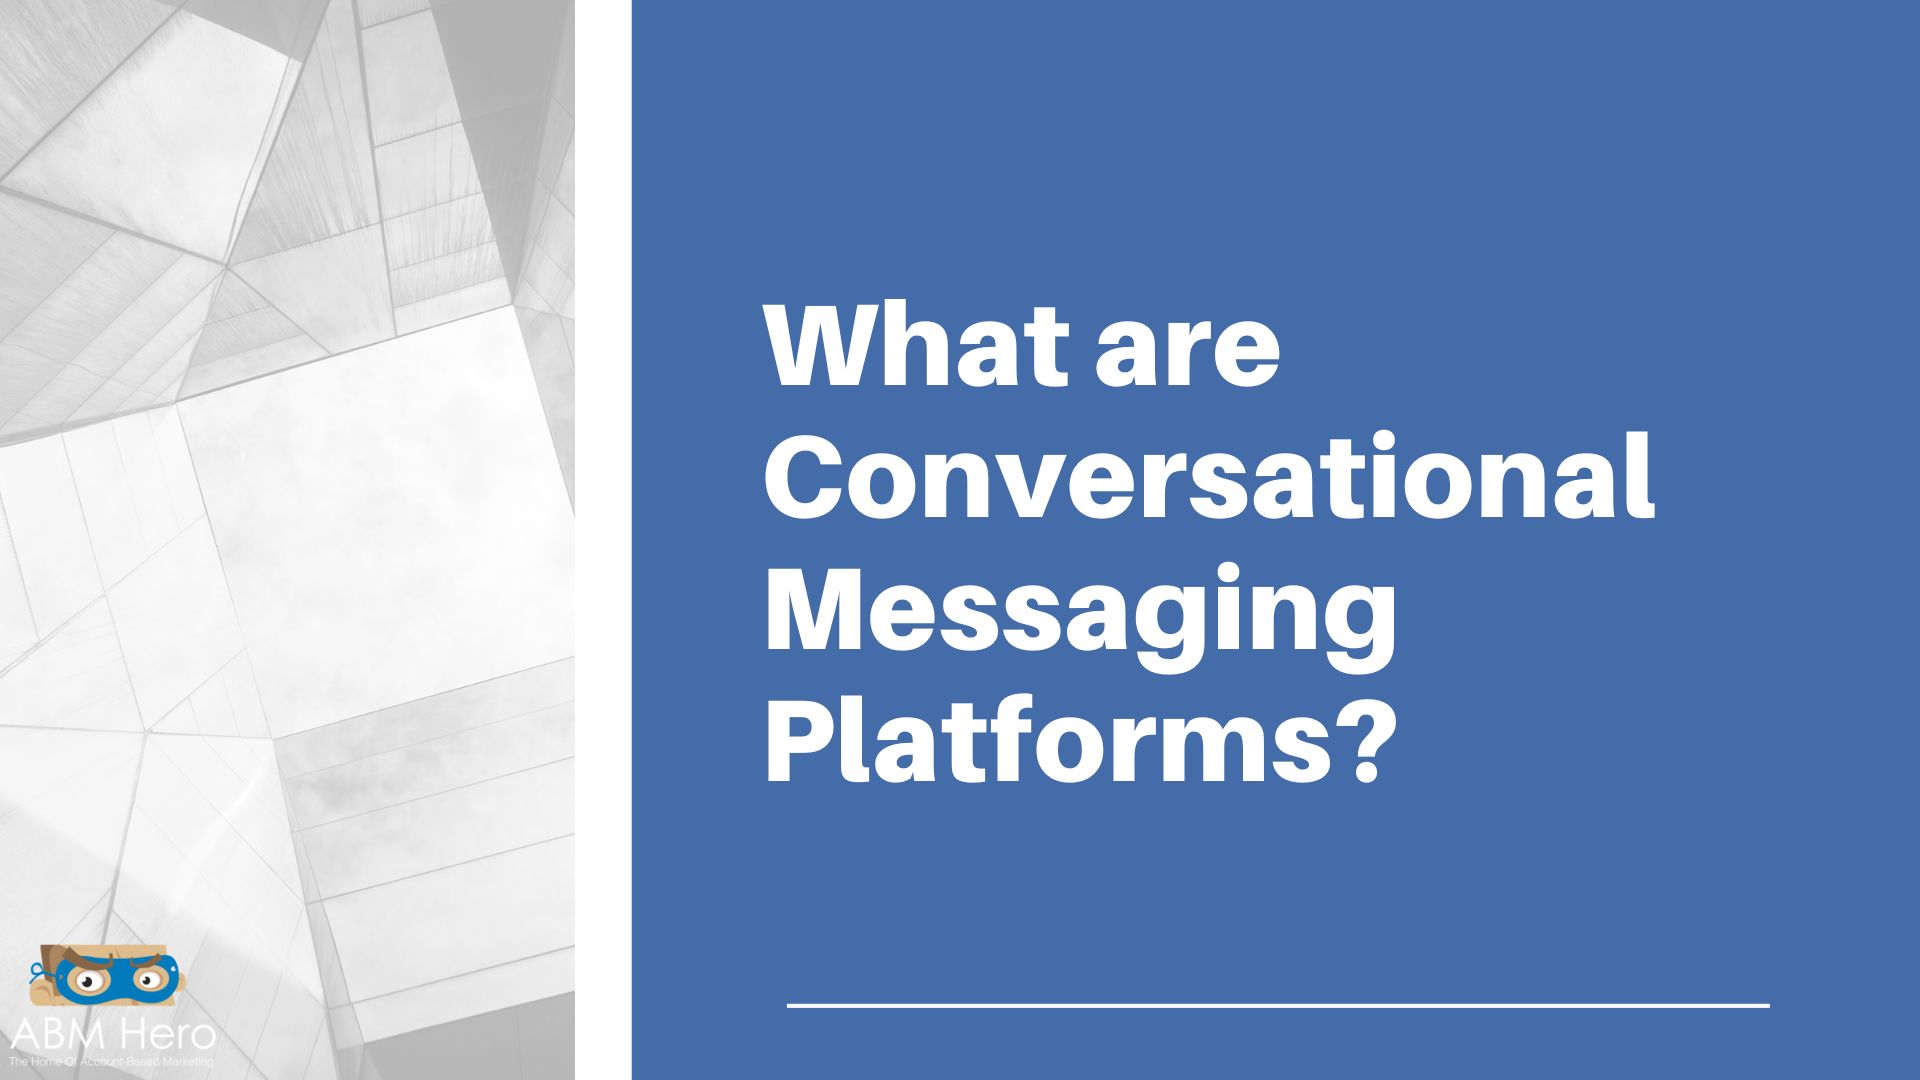 You are currently viewing What are Conversational Messaging Platforms?